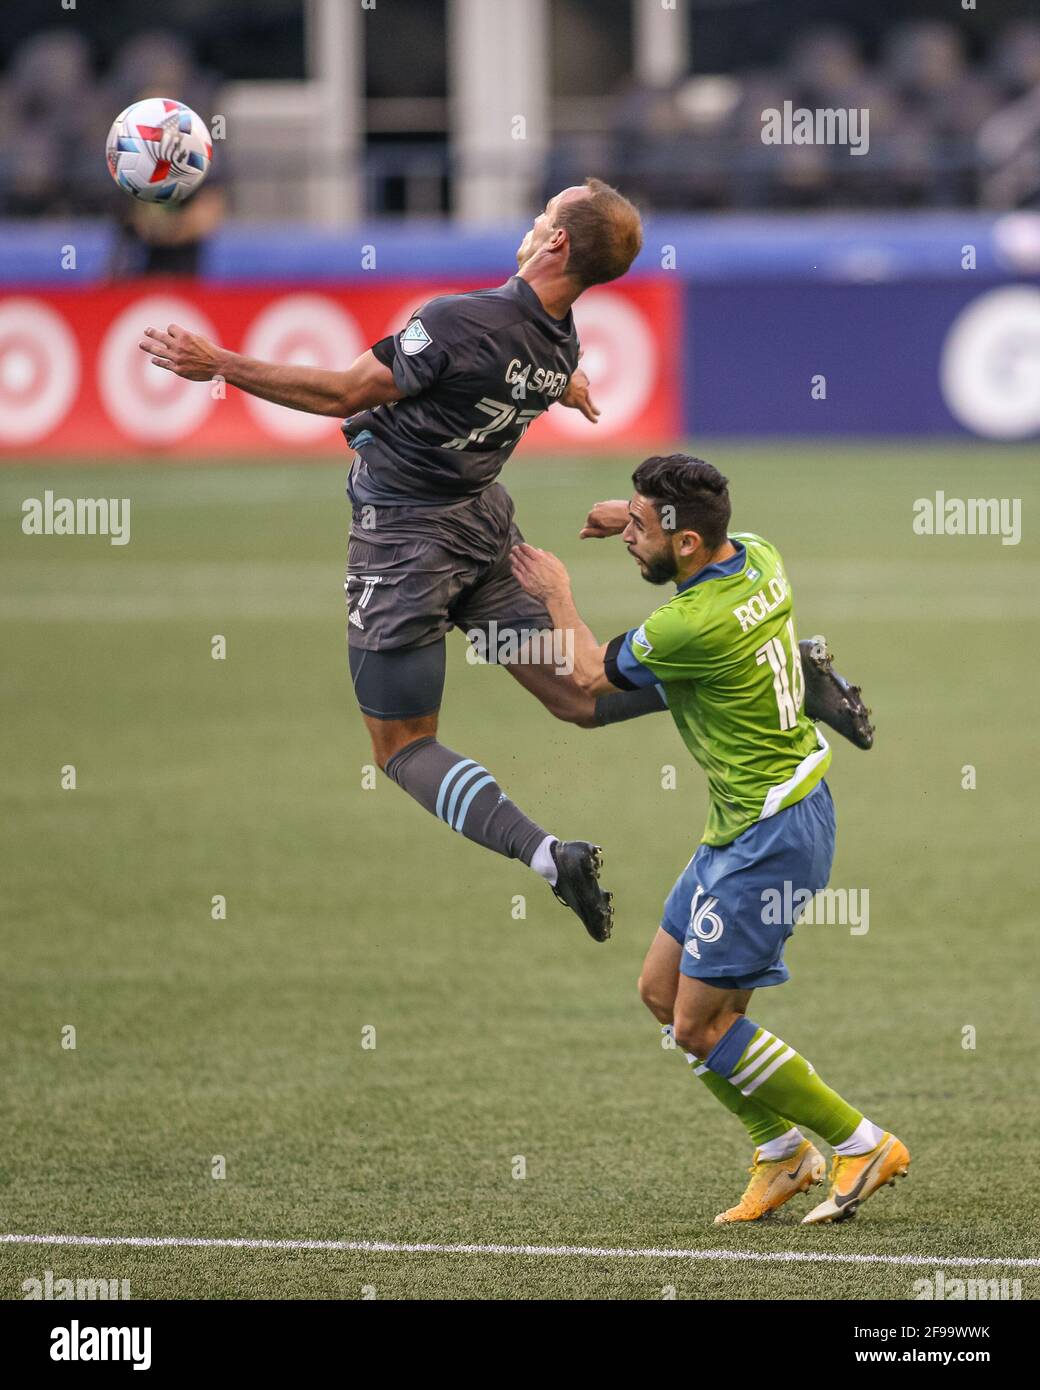 Minnesota United FC defender Chase Gasper (77) leaps for the ball past Seattle Sounders FC midfielder Alex Roldan (16) during the first half of an MLS Stock Photo